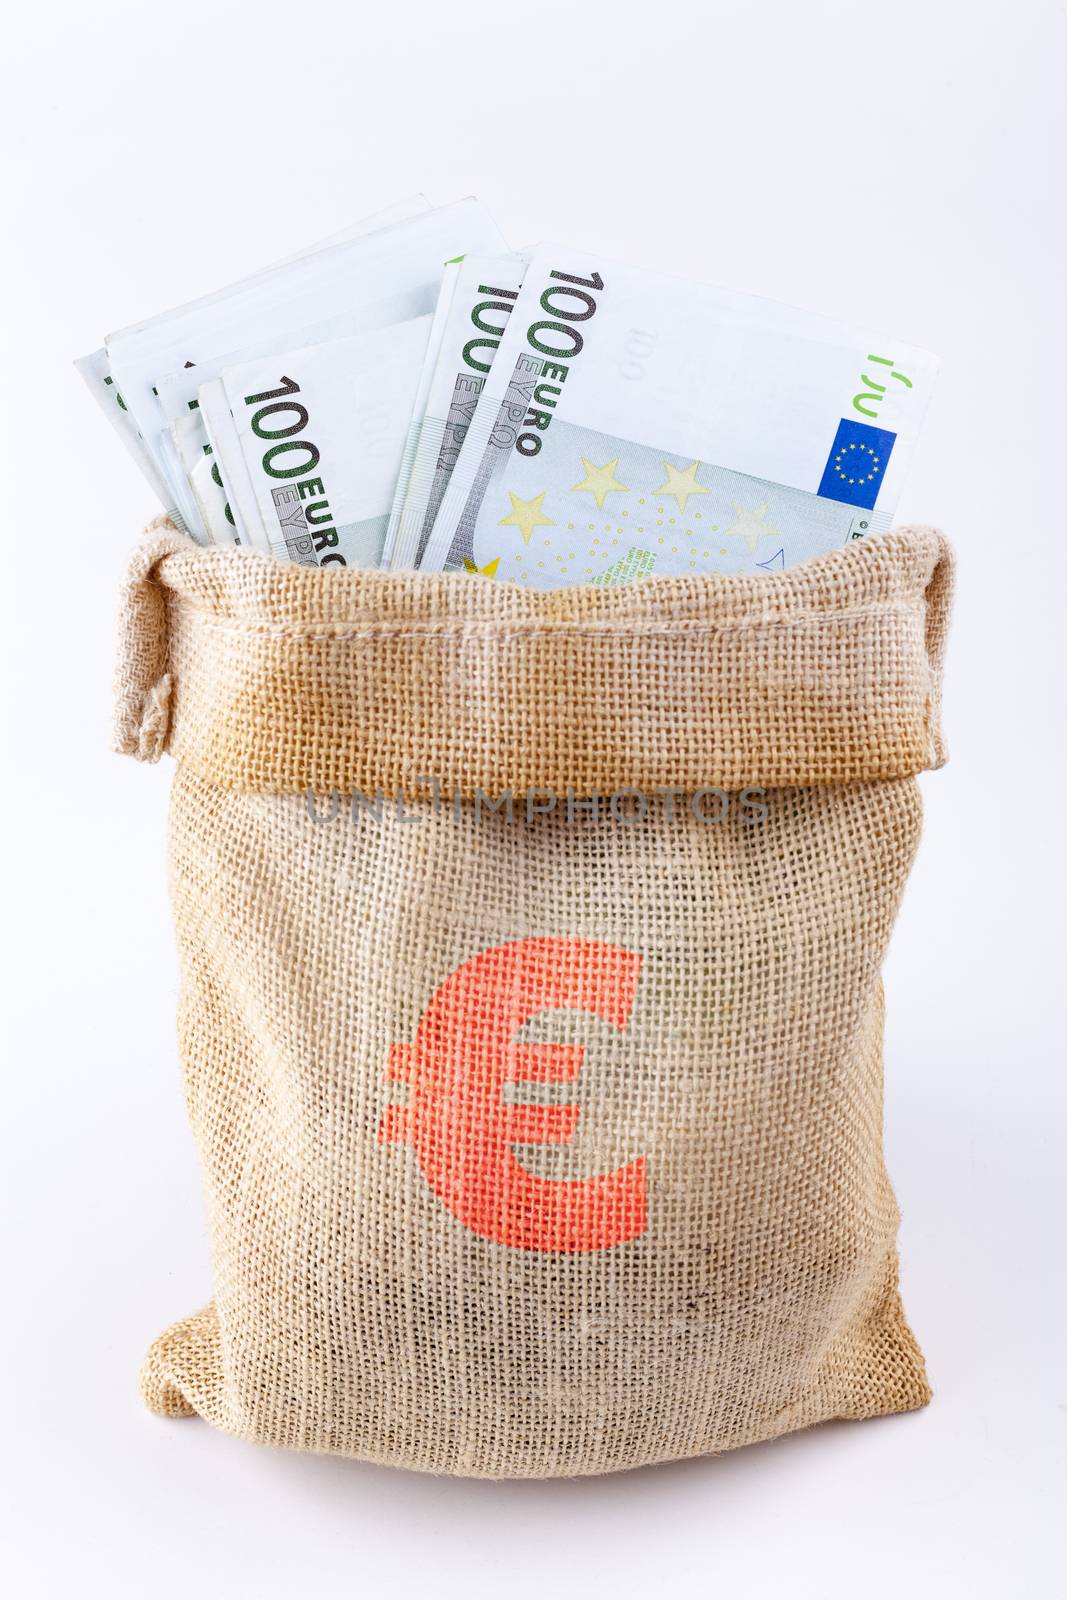 Hundreds of Euros by orcearo